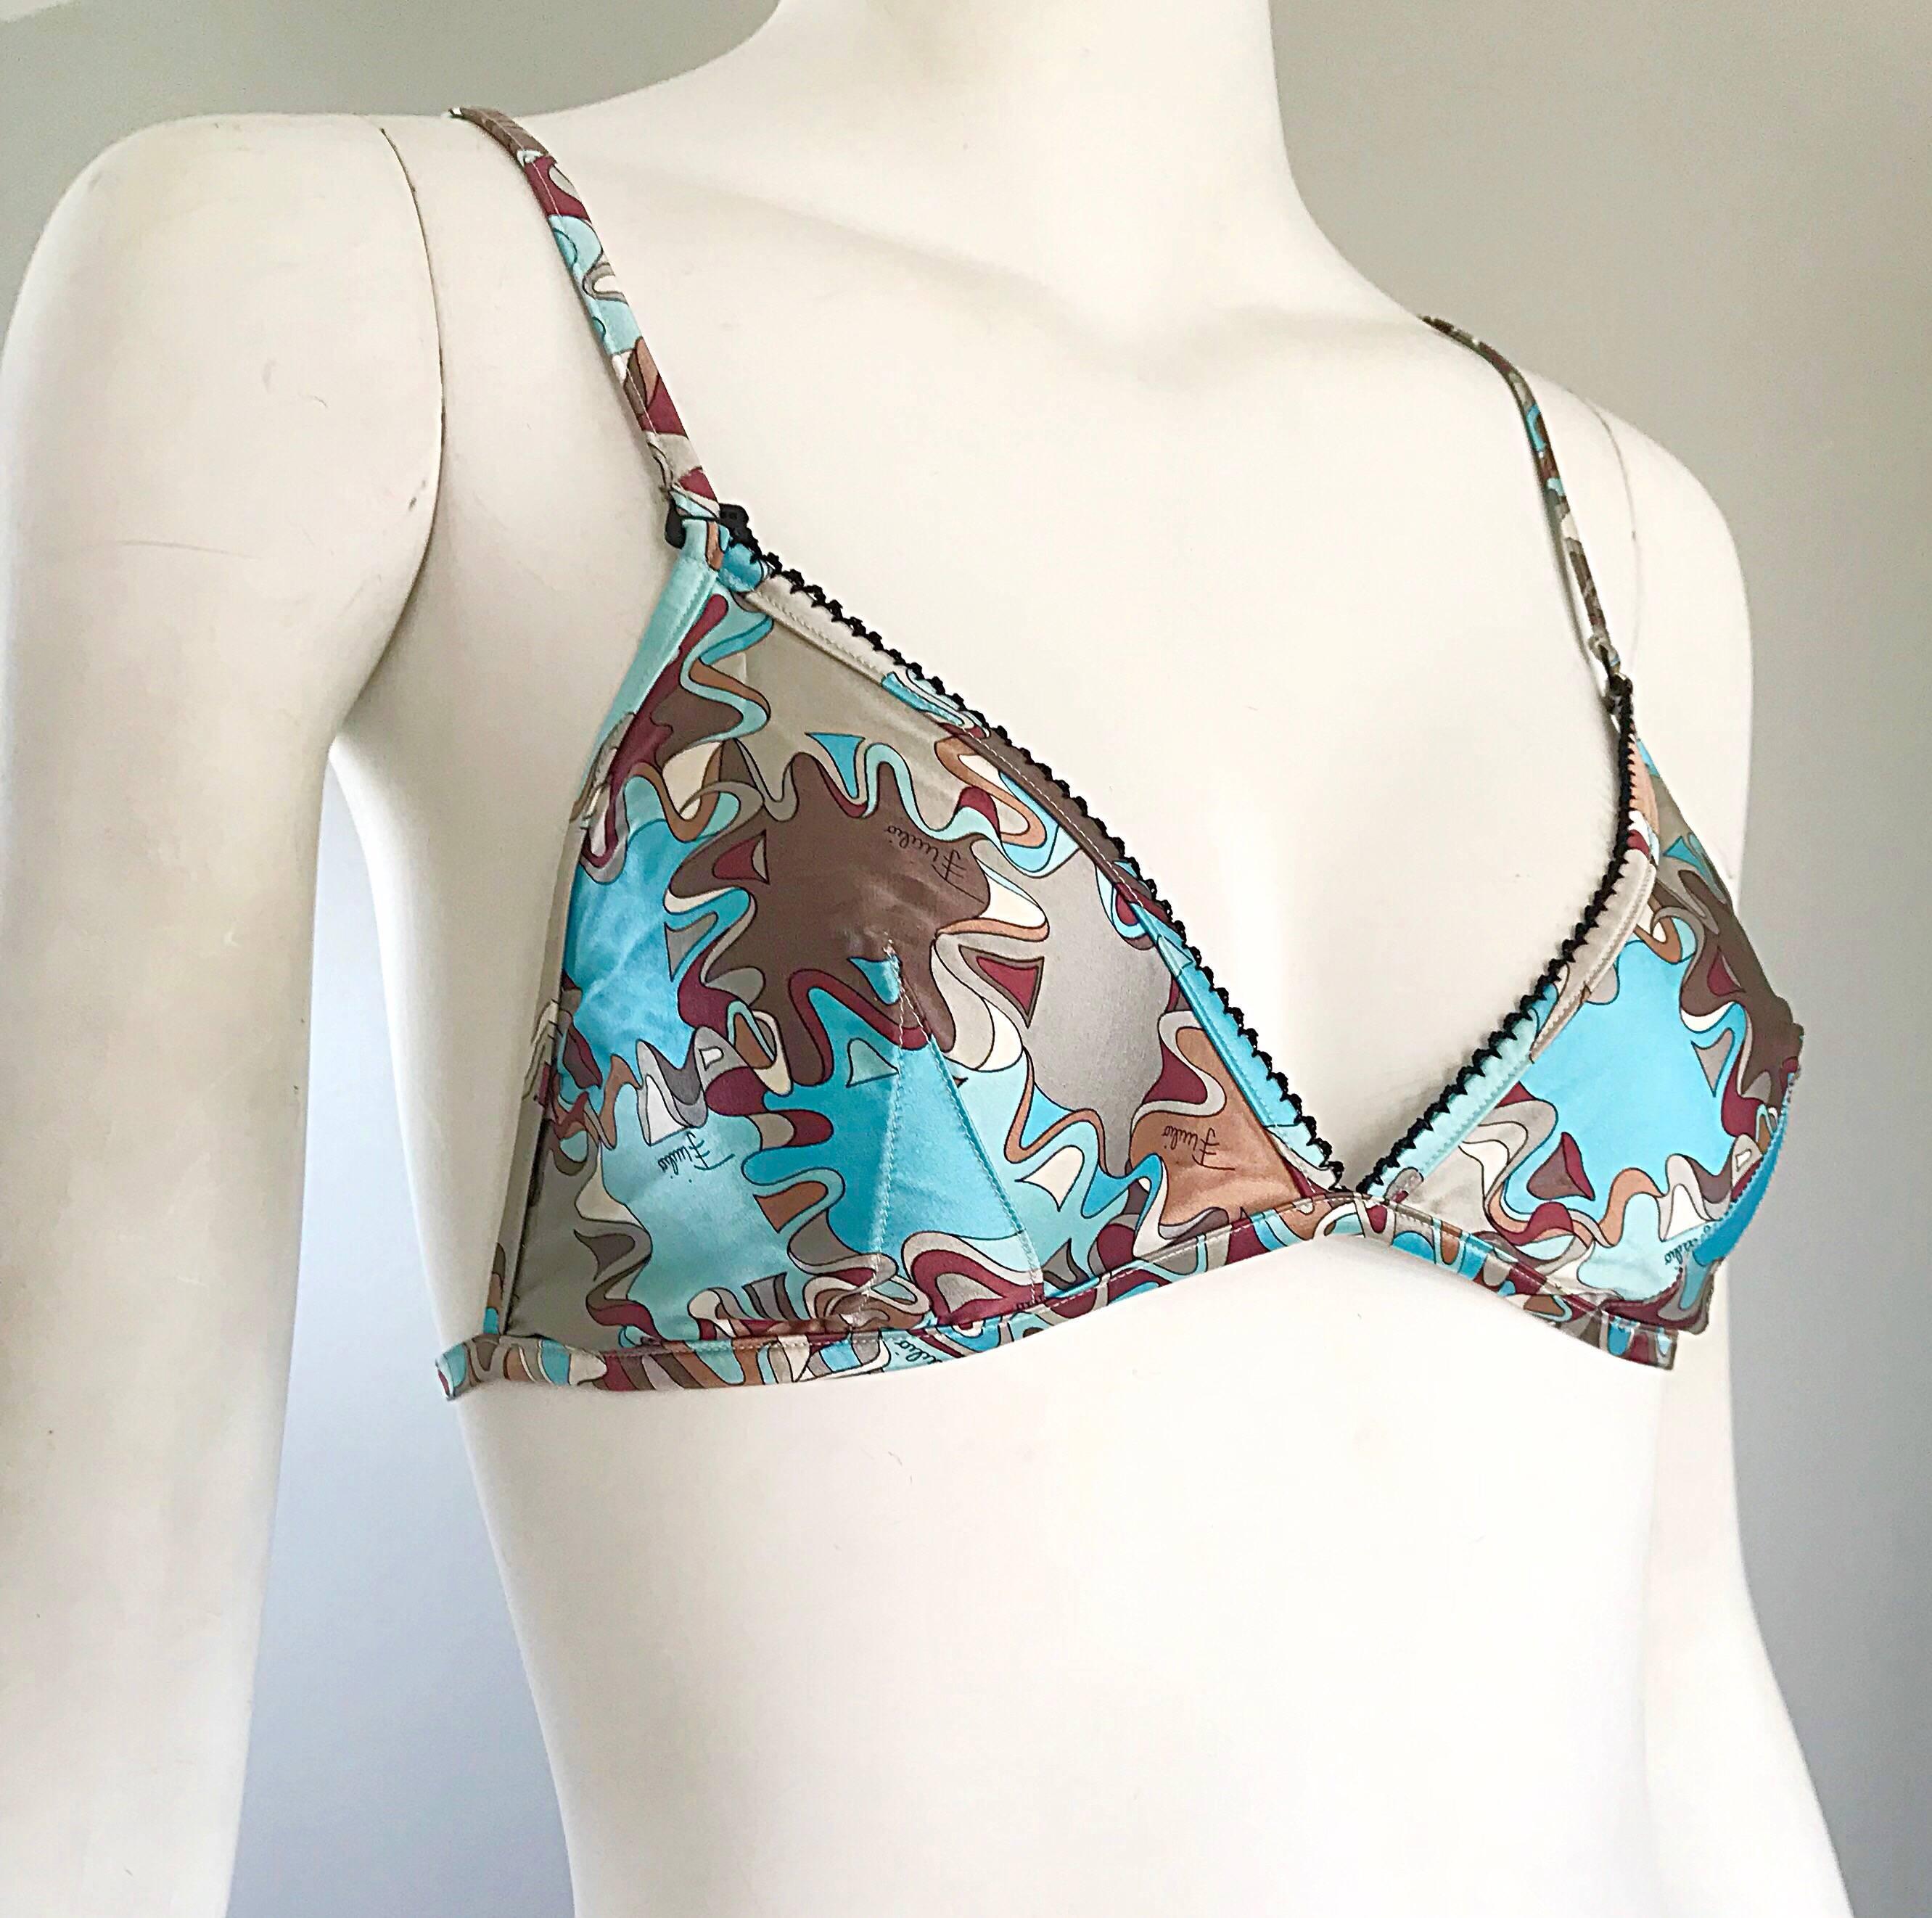 1990s Emilio Pucci New Light Blue + Brown + Maroon Signature Mosaic Silk Bra Top In Excellent Condition For Sale In San Diego, CA